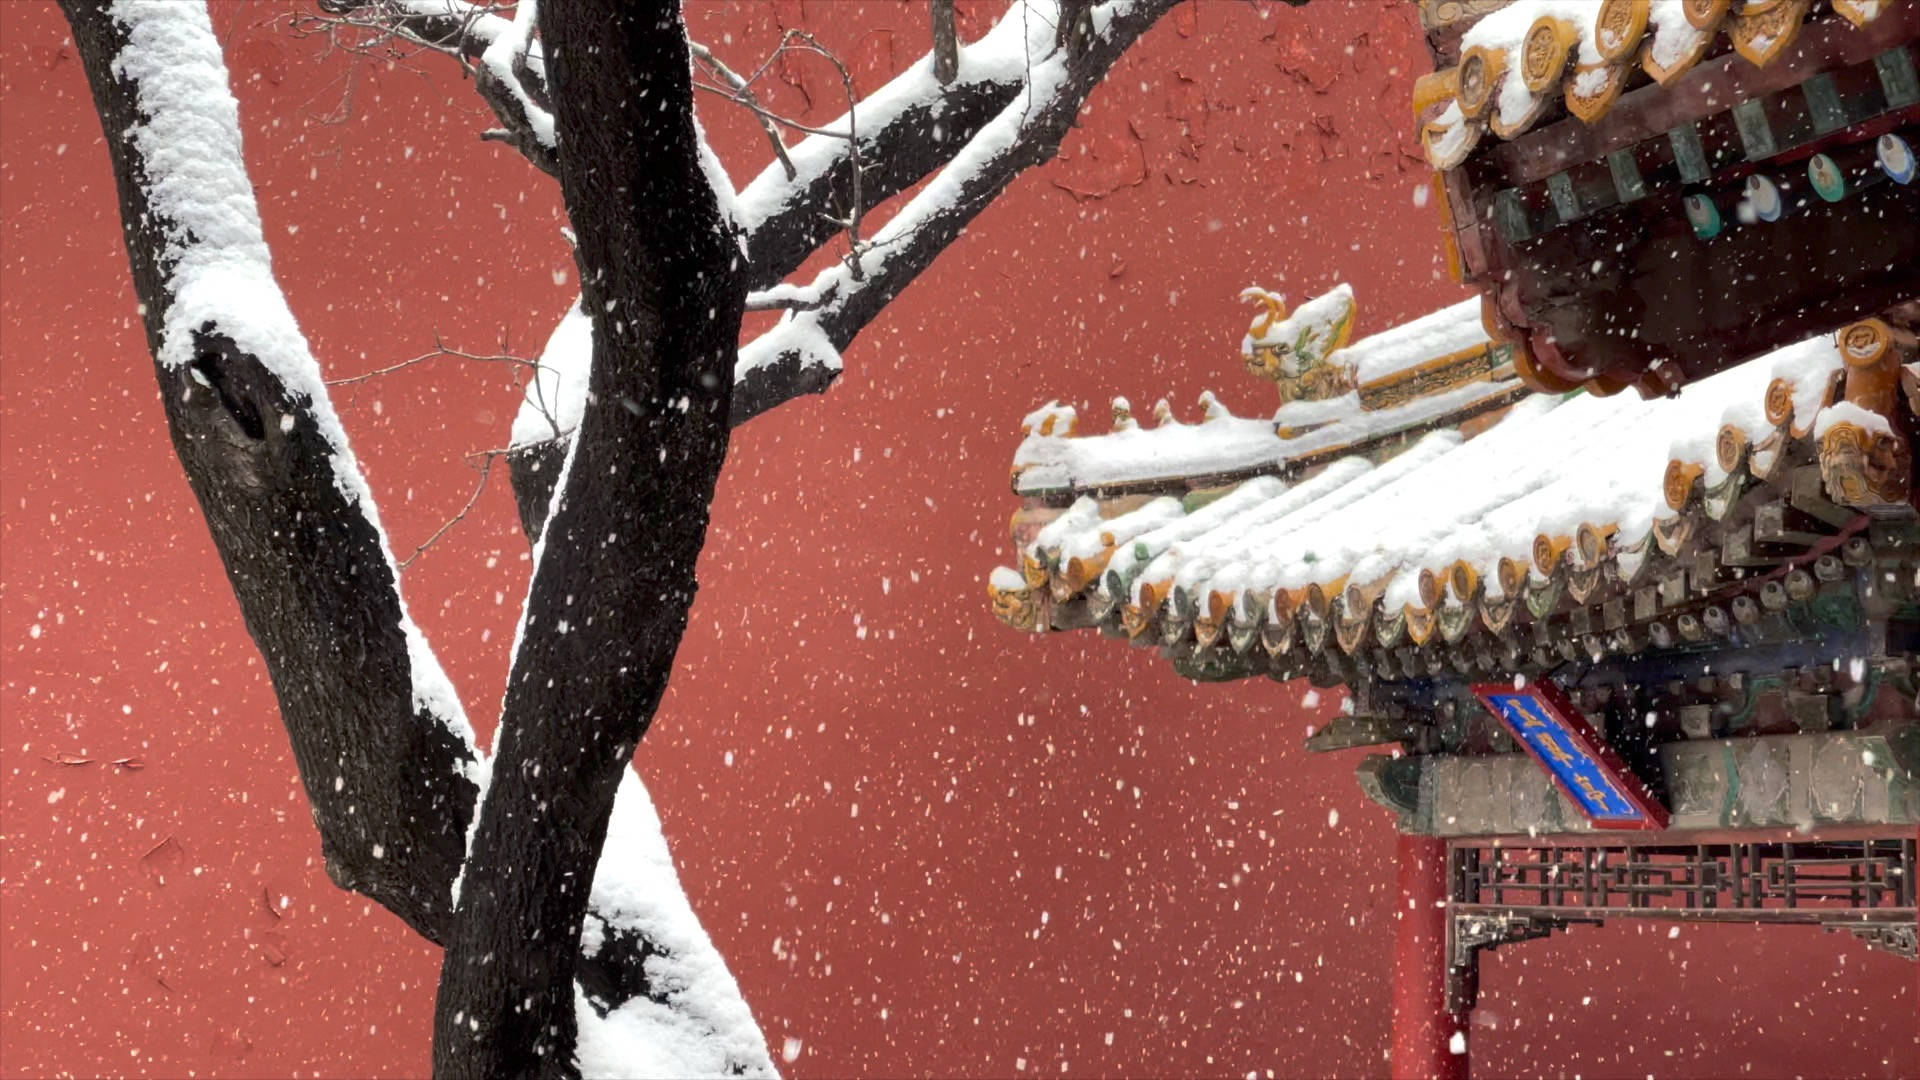 Forbidden City Roofs Covered In Snow Wallpaper